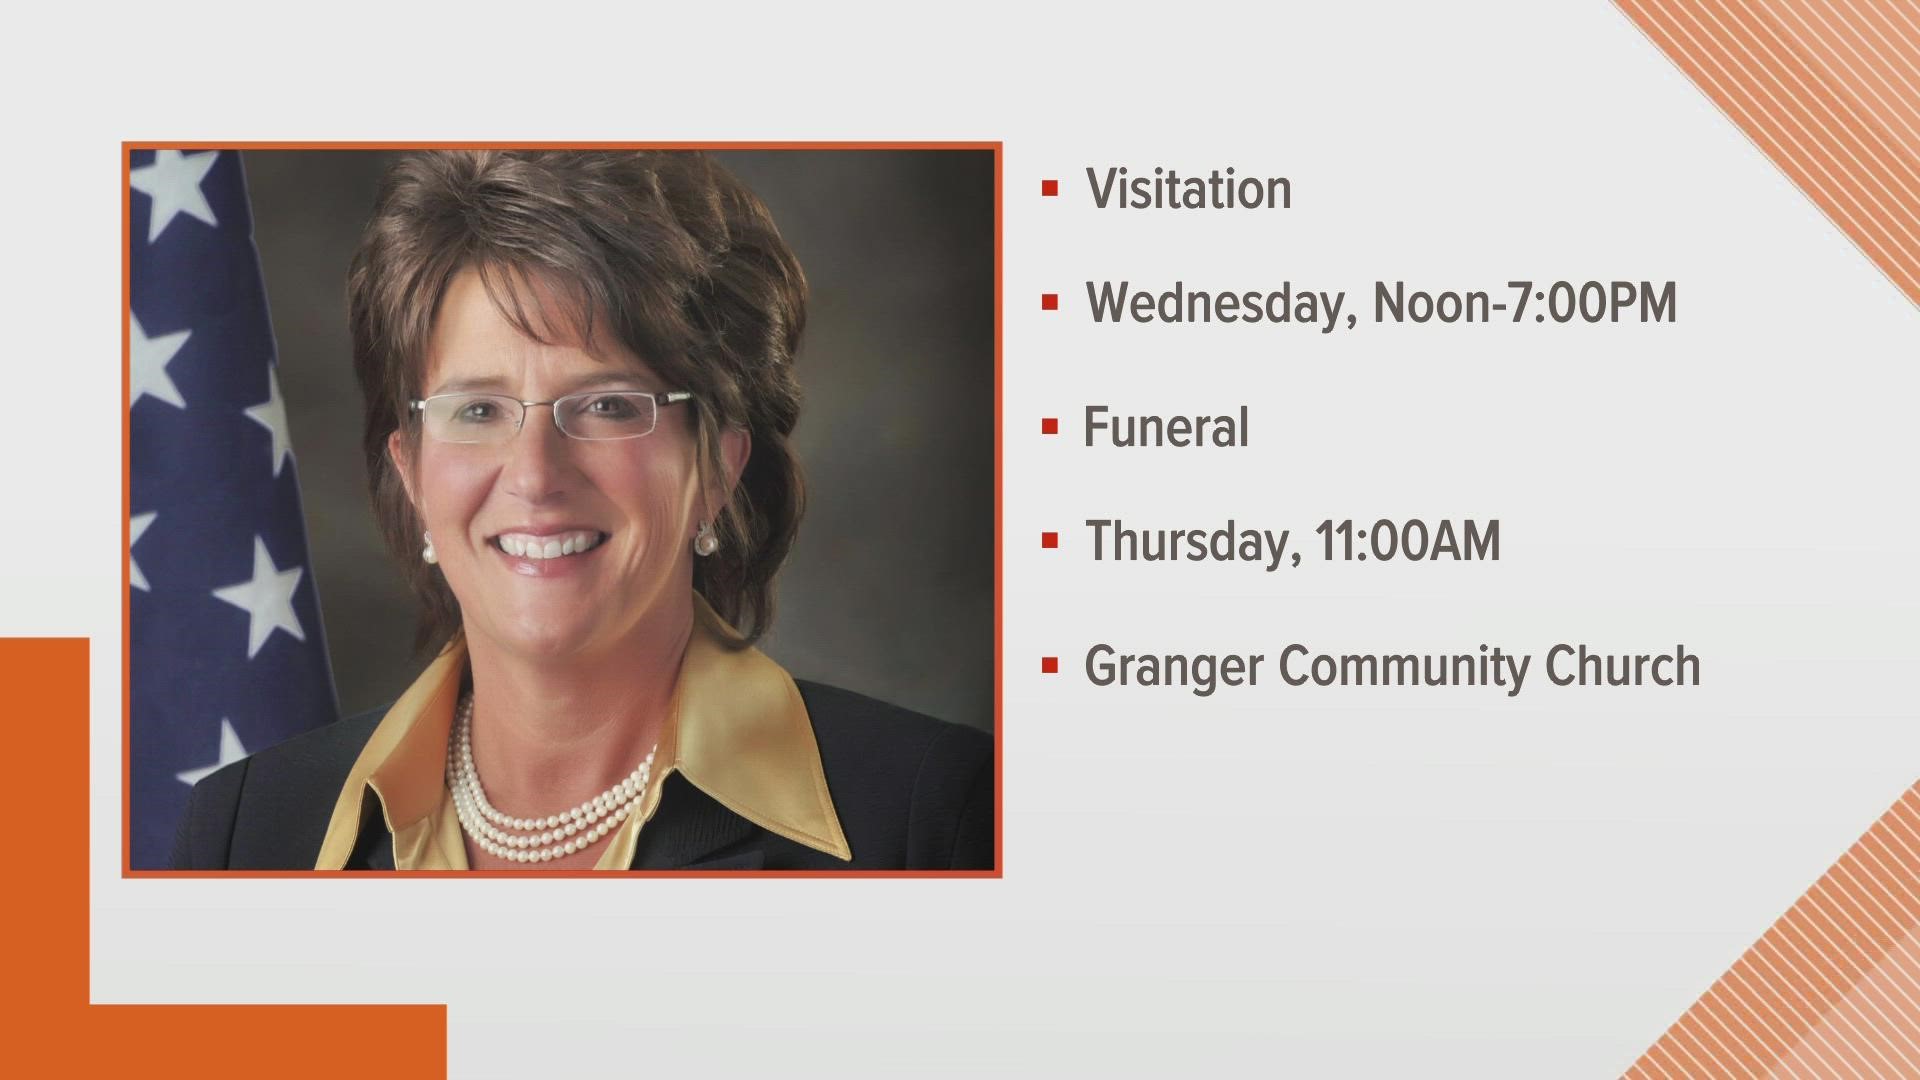 Visitation services will be held at Granger Community Church from noon to 7 p.m.